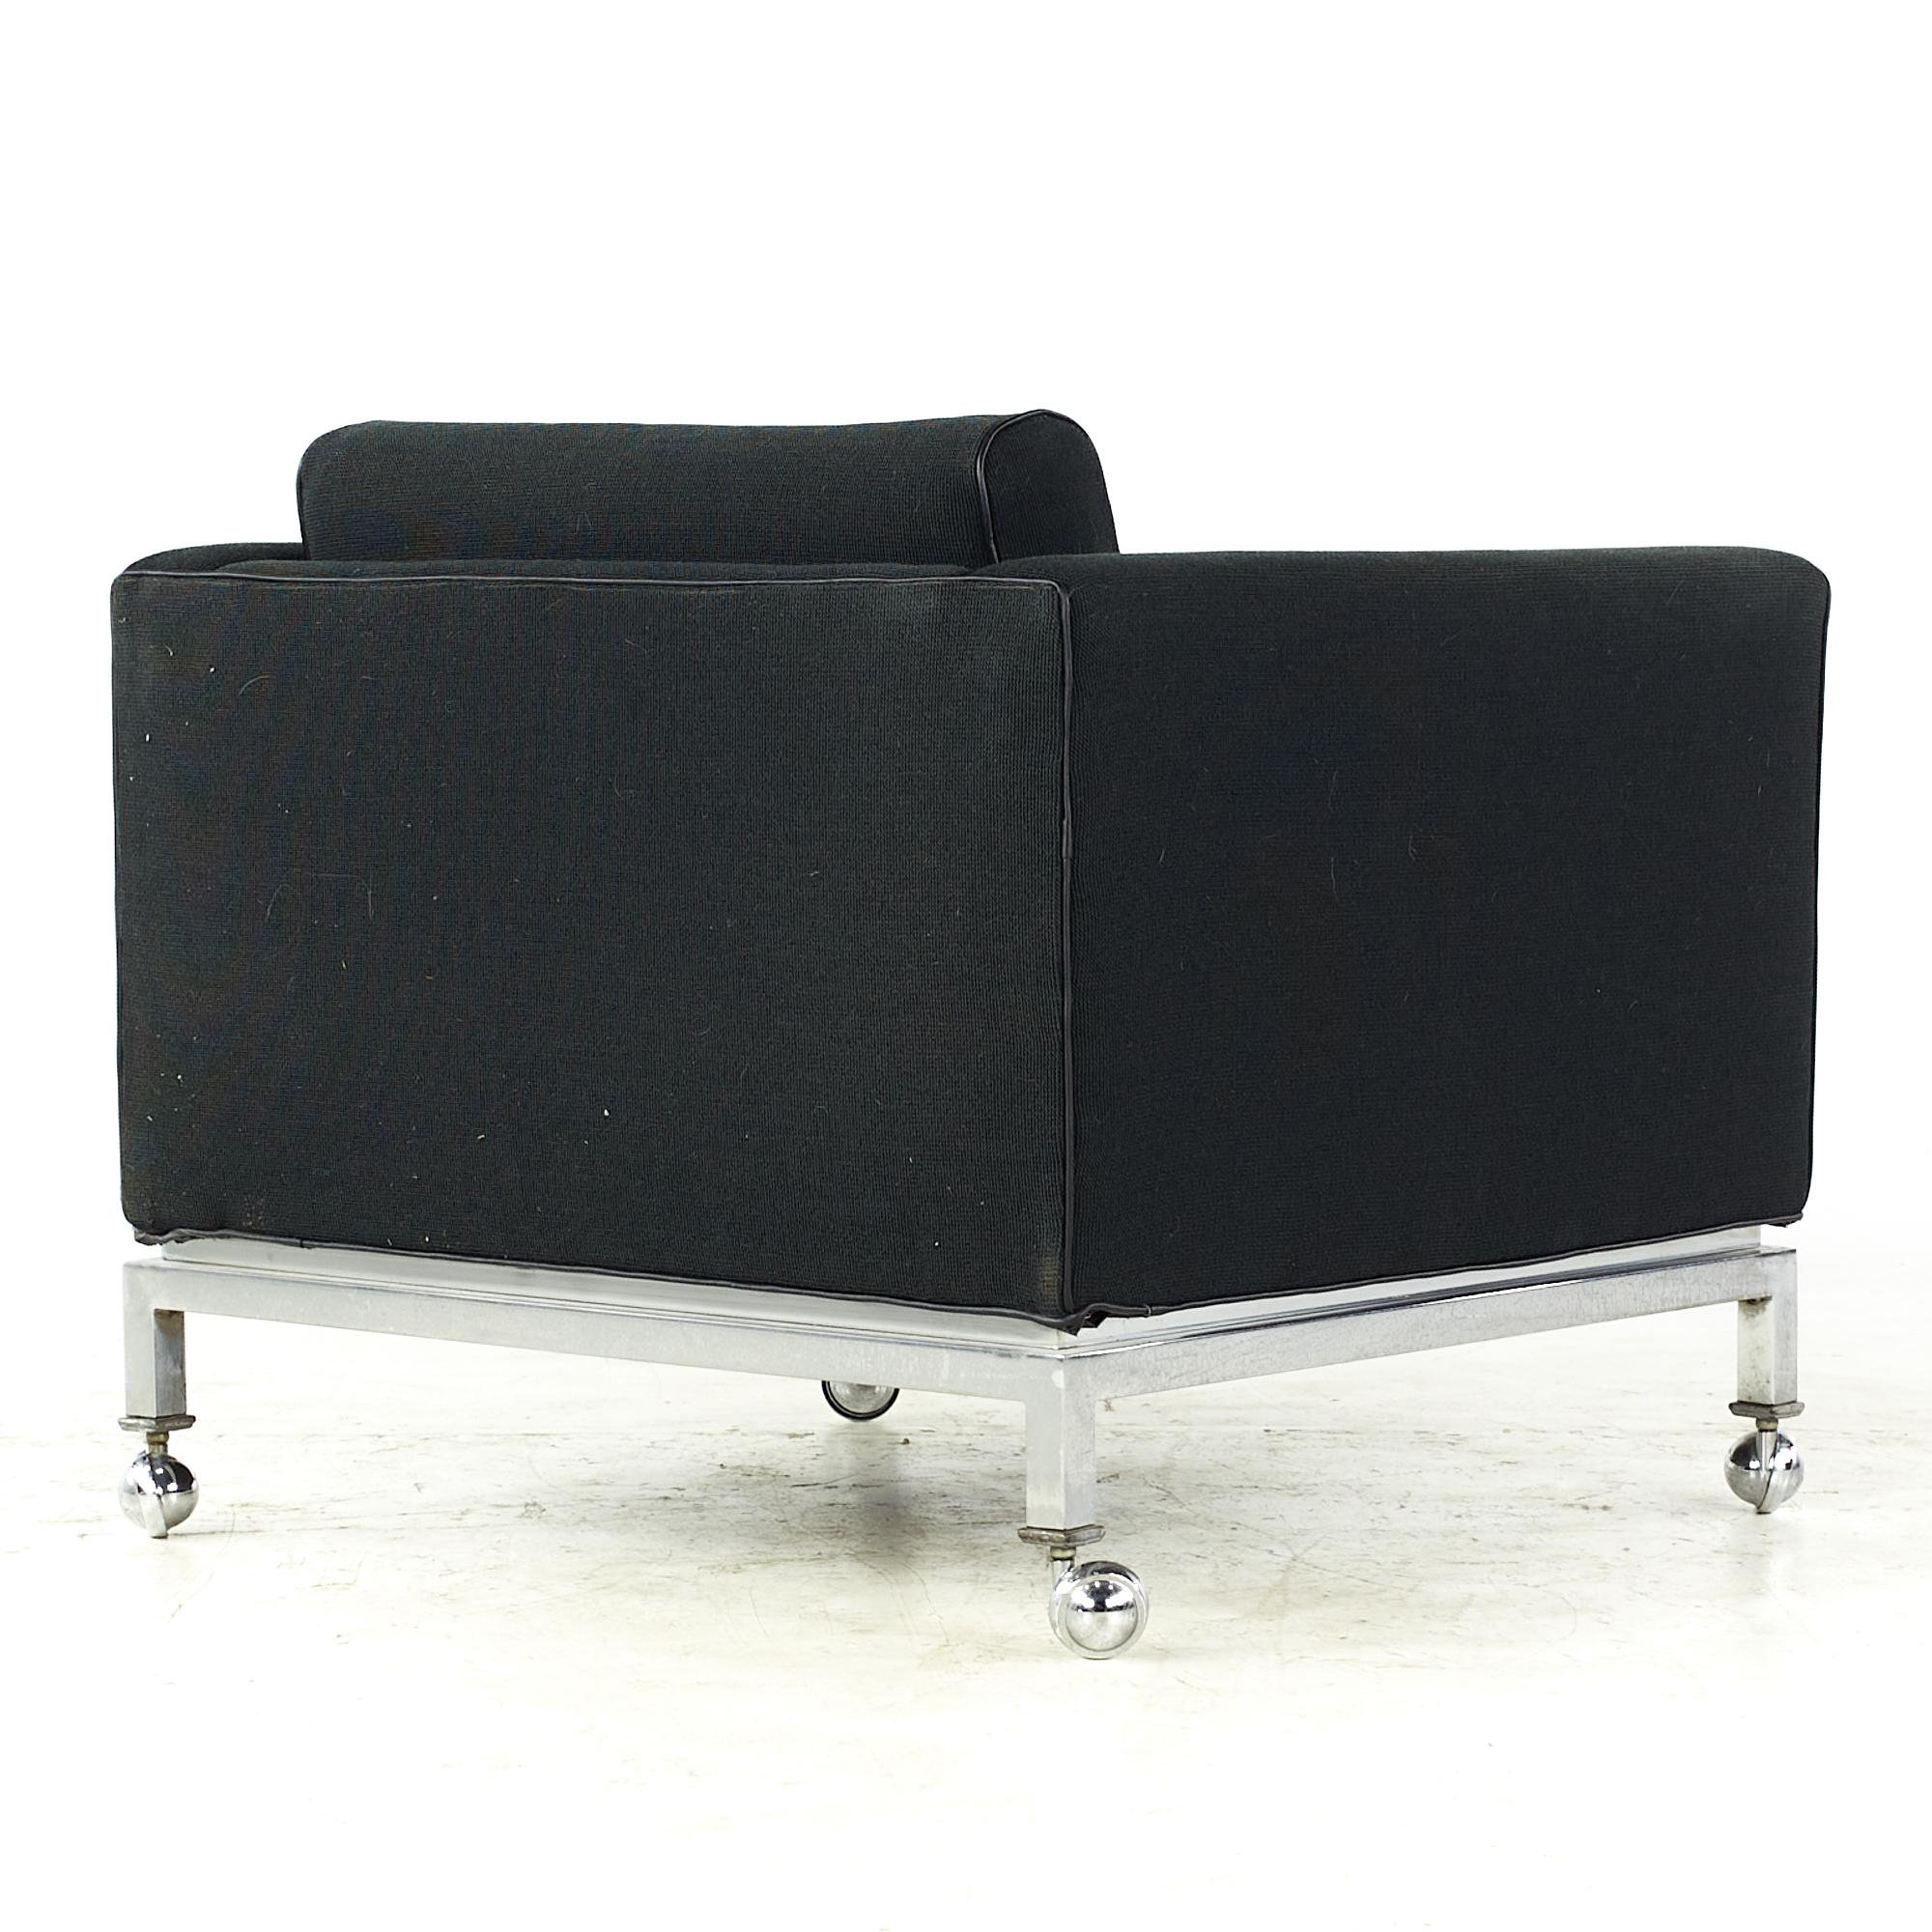 Upholstery Alma Midcentury Rolling Chrome Lounge Chairs, Pair For Sale